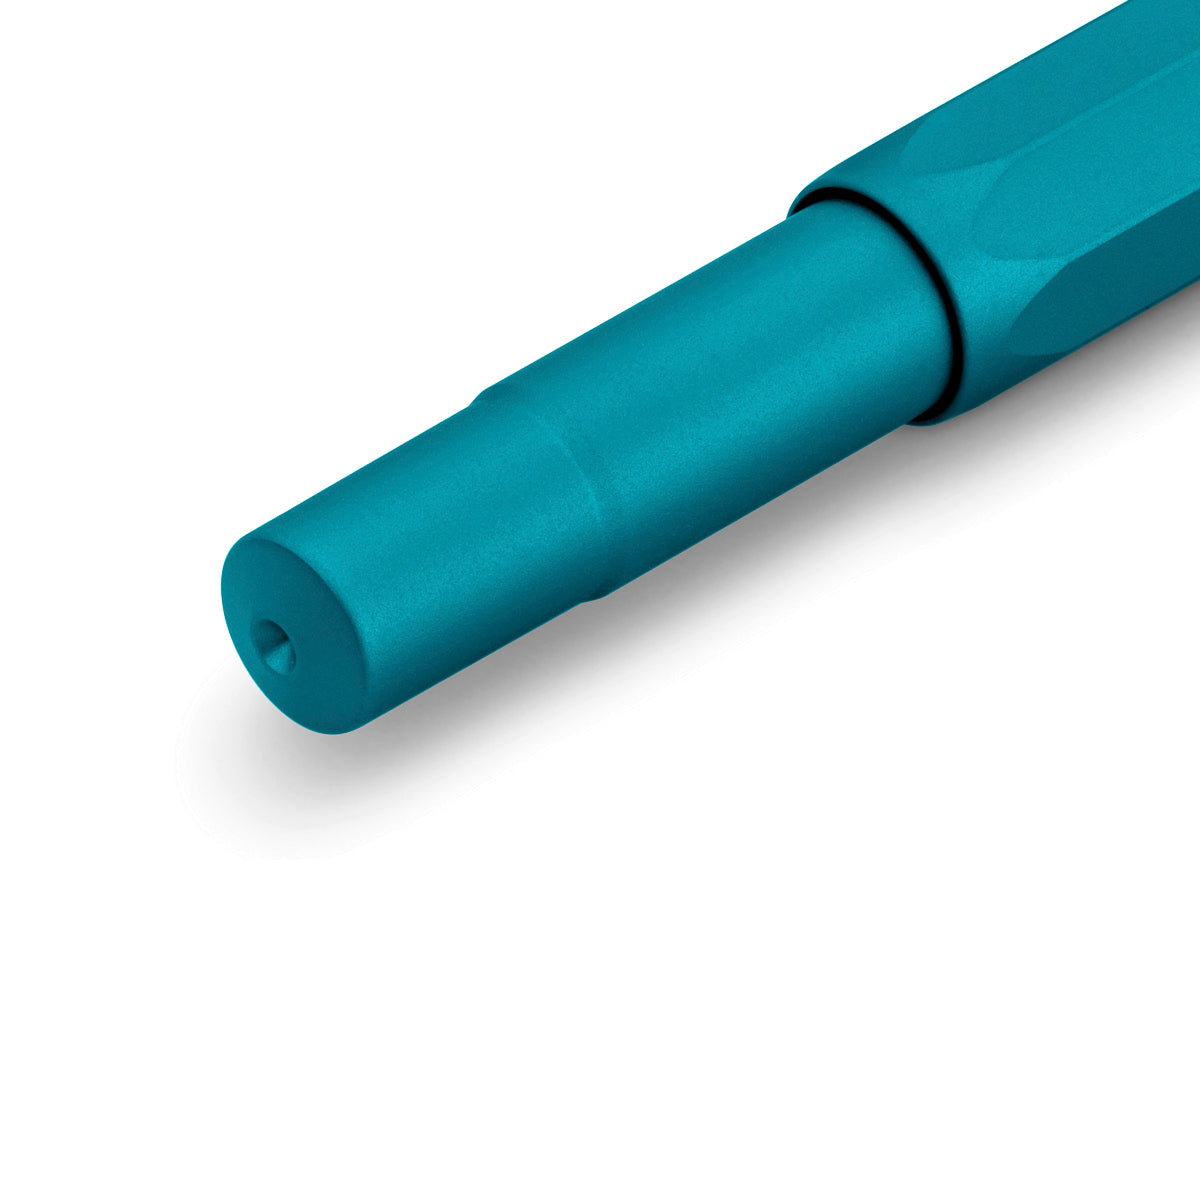 Close-up of the lower section of a matte metallic turquoise pen